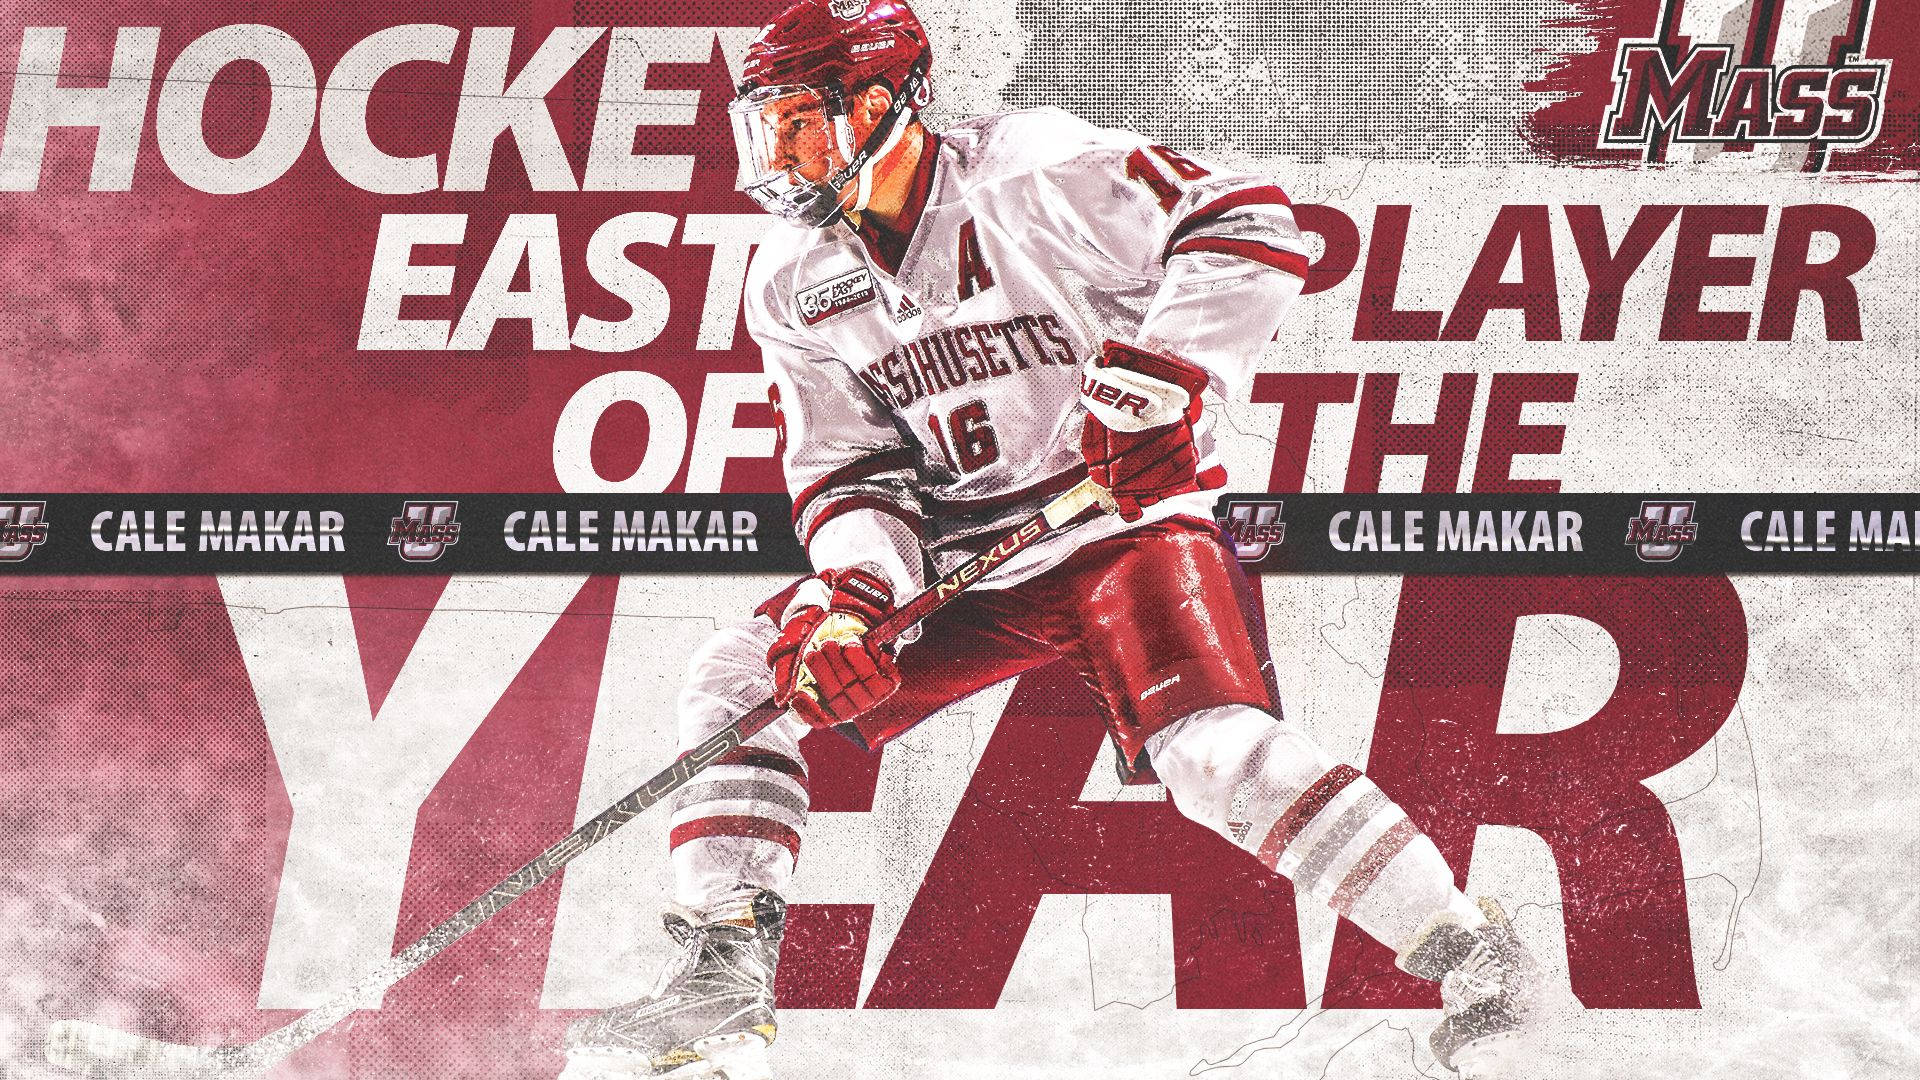 Cale Makar East Player Of The Year Wallpaper